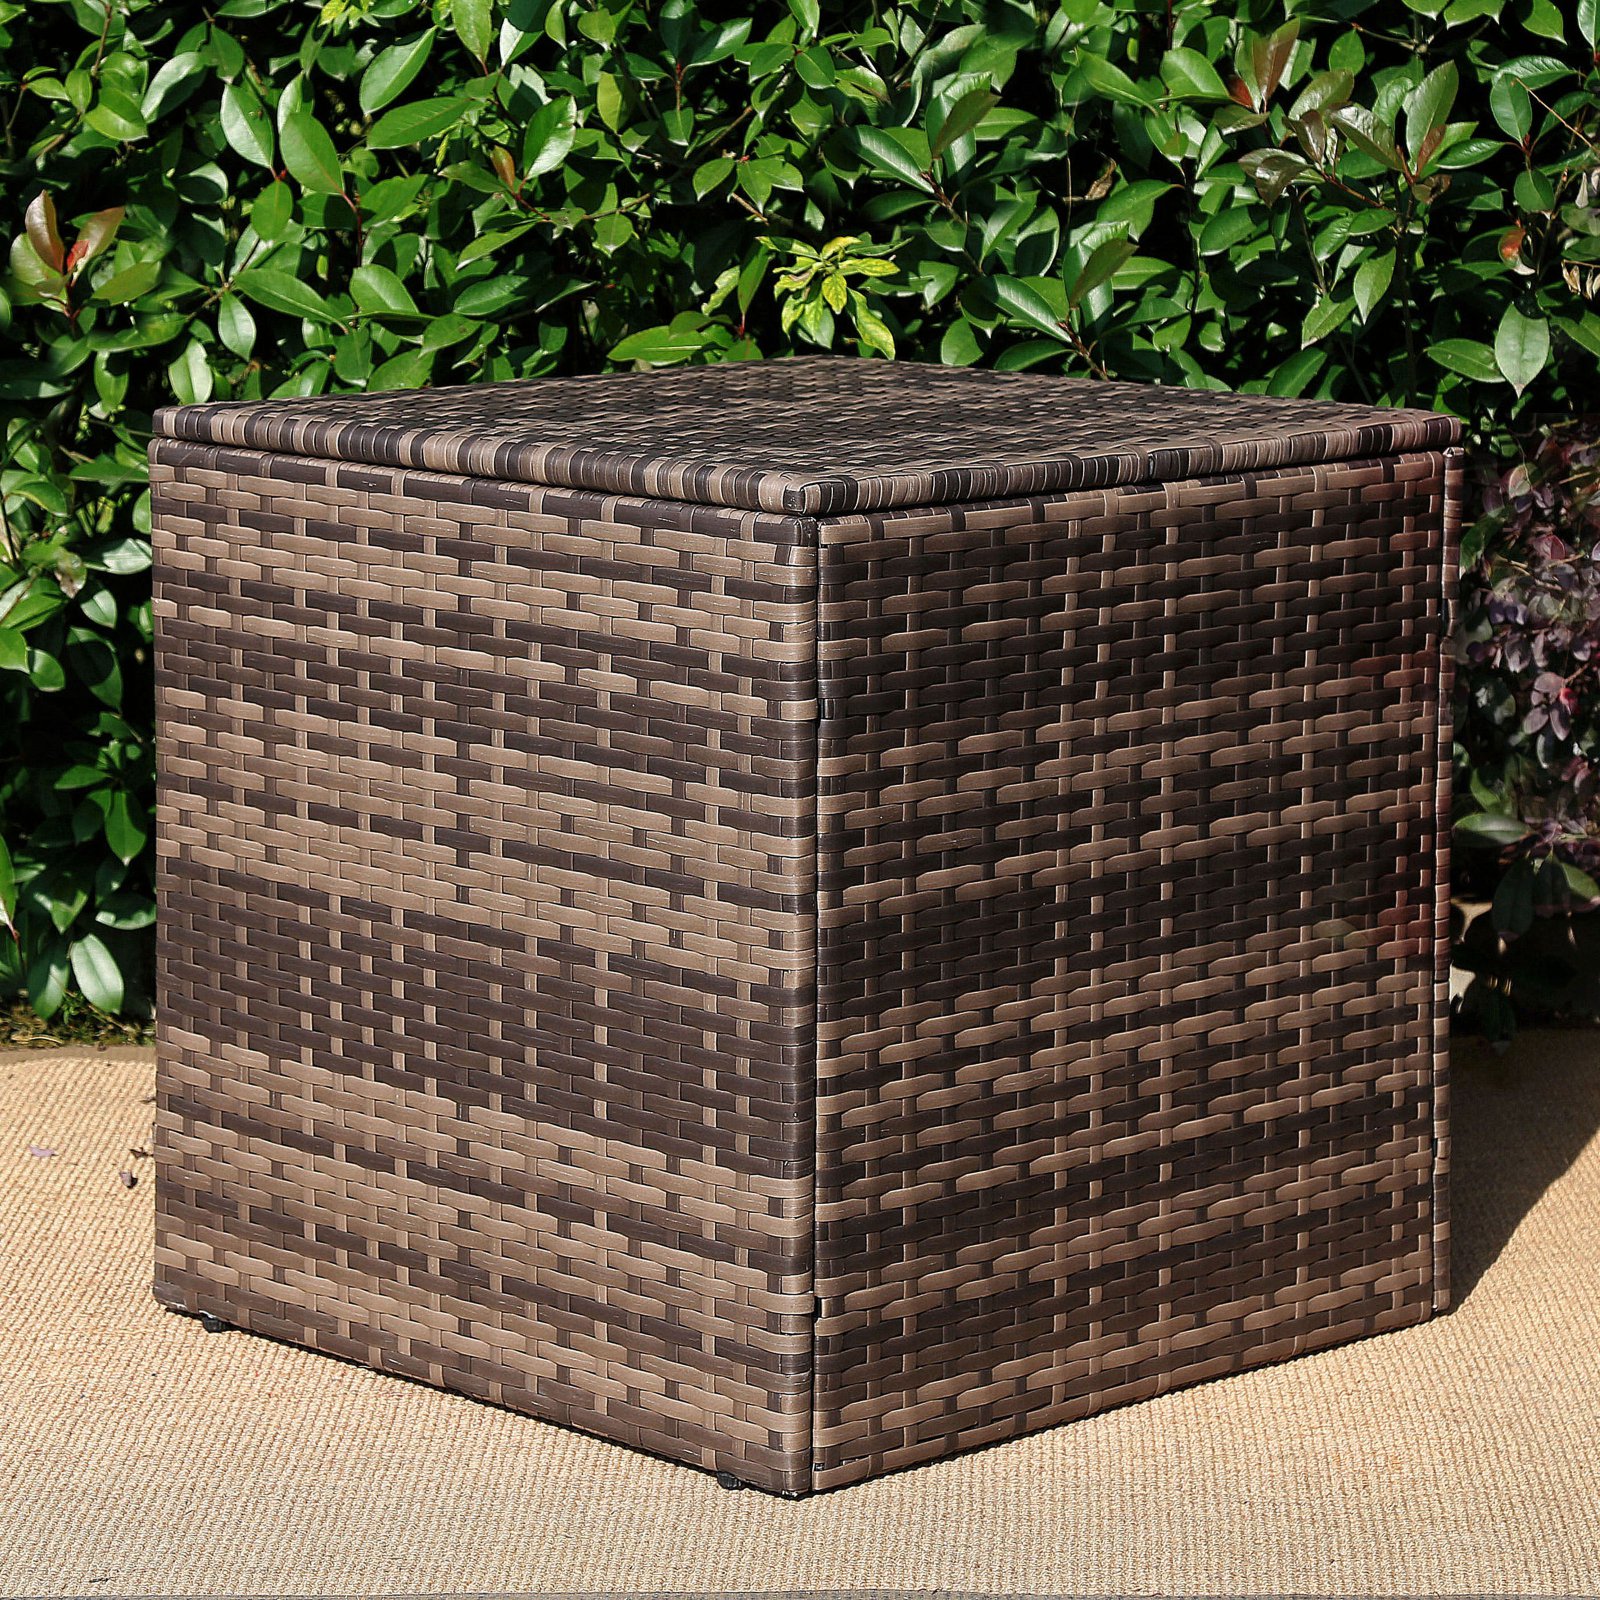 Baner Garden A105 Outdoor Glass Rattan Garden Square Coffee Table with Storage Compartment - image 1 of 2